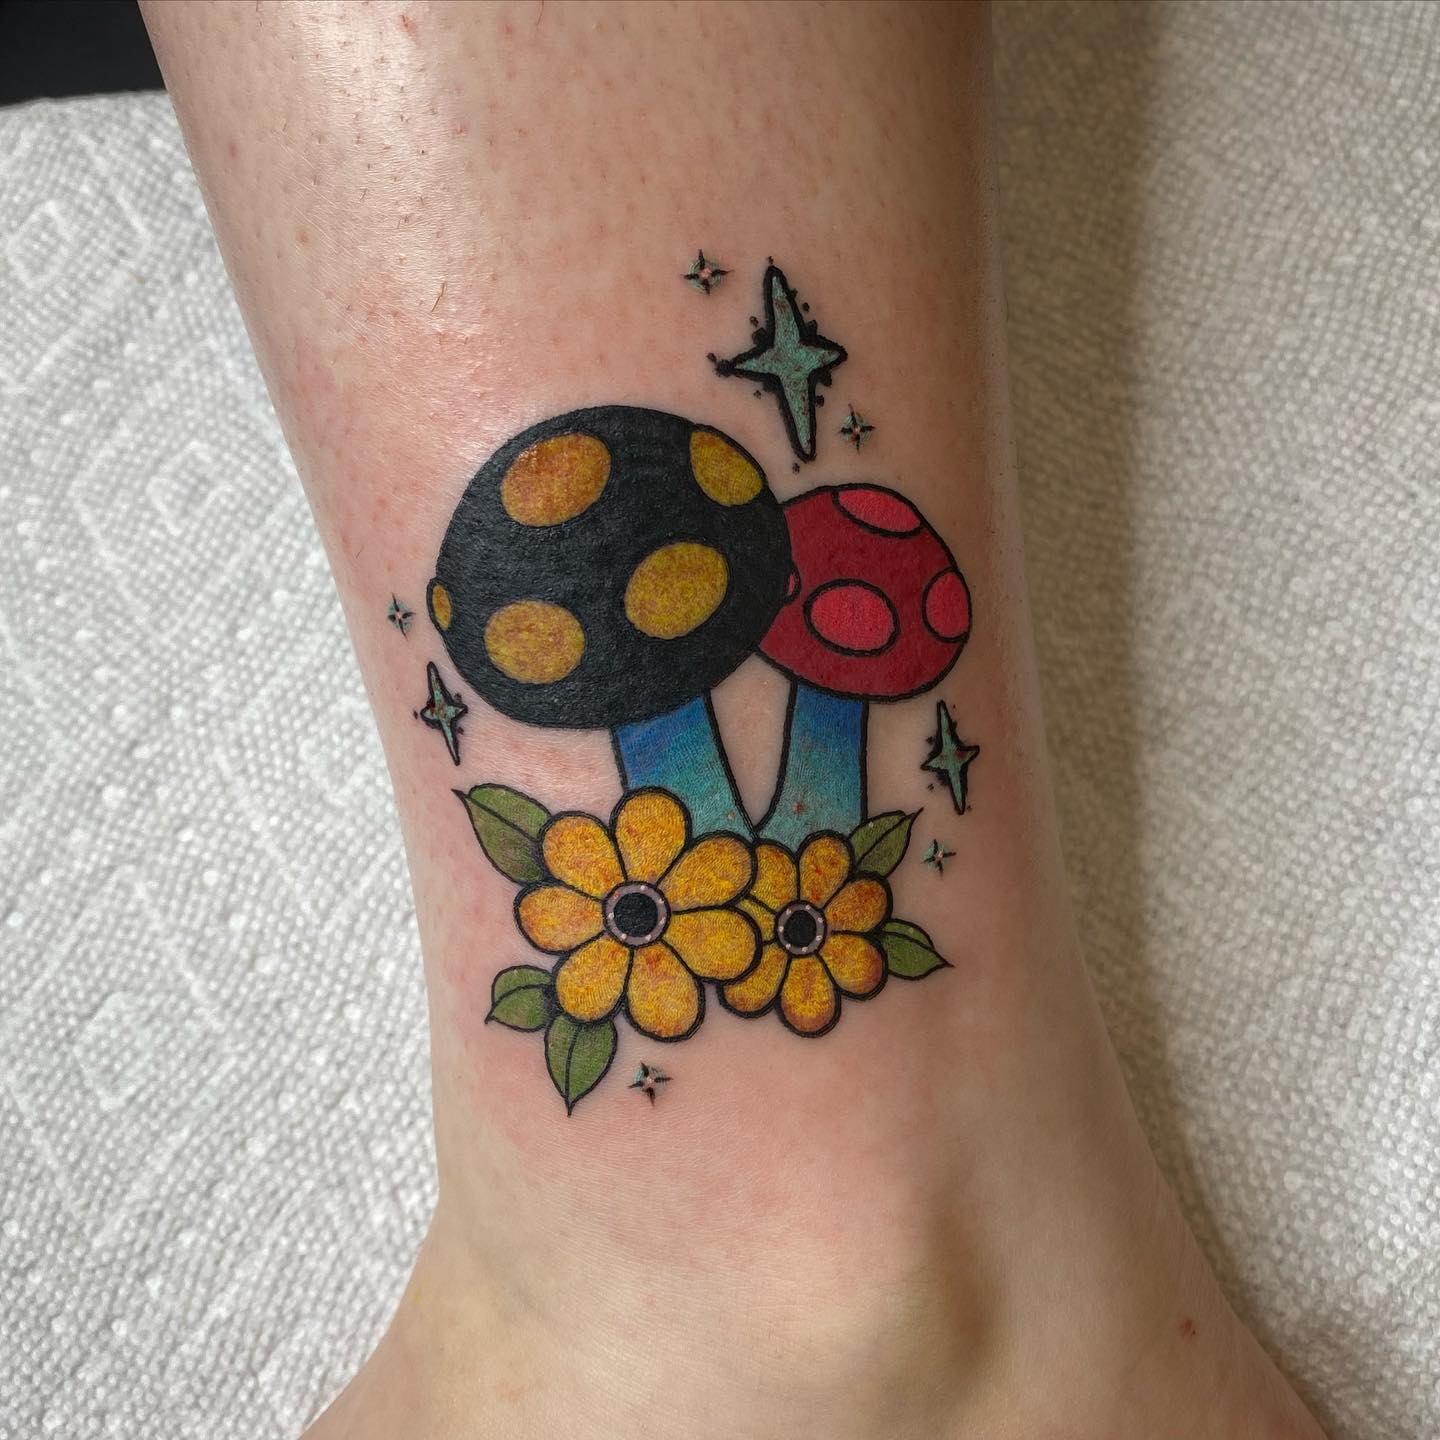 If you fancy bright and funky ideas, try out these cool loud mushrooms. This tattoo will show that you’re a wild person who likes to experiment with different elements and food in her life. Cool and flashy, this design can be attention-seeking when done the right way.